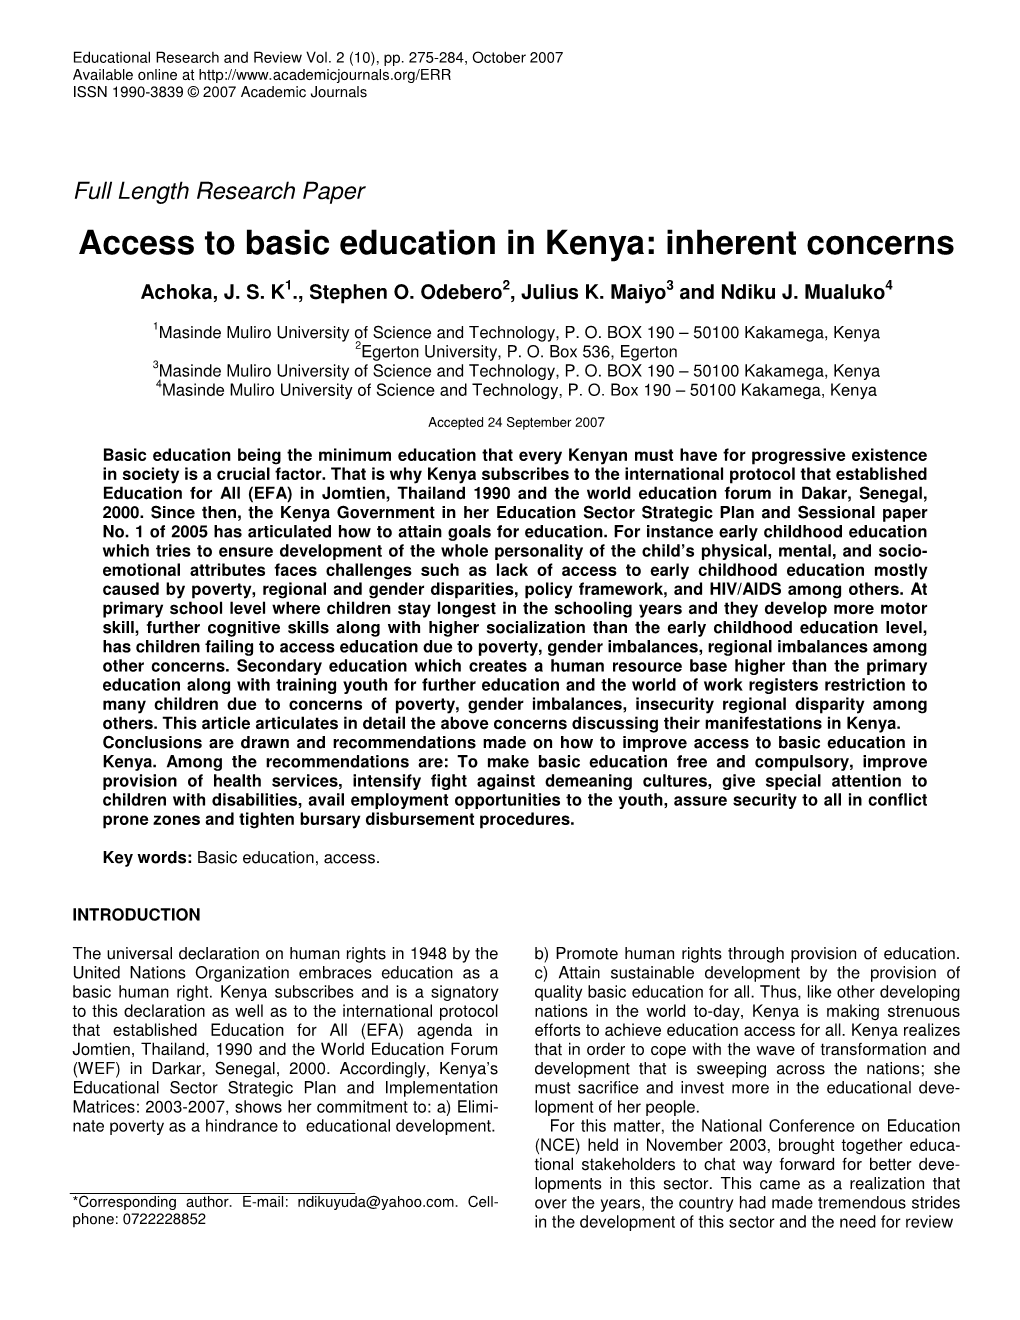 Access to Basic Education in Kenya: Inherent Concerns